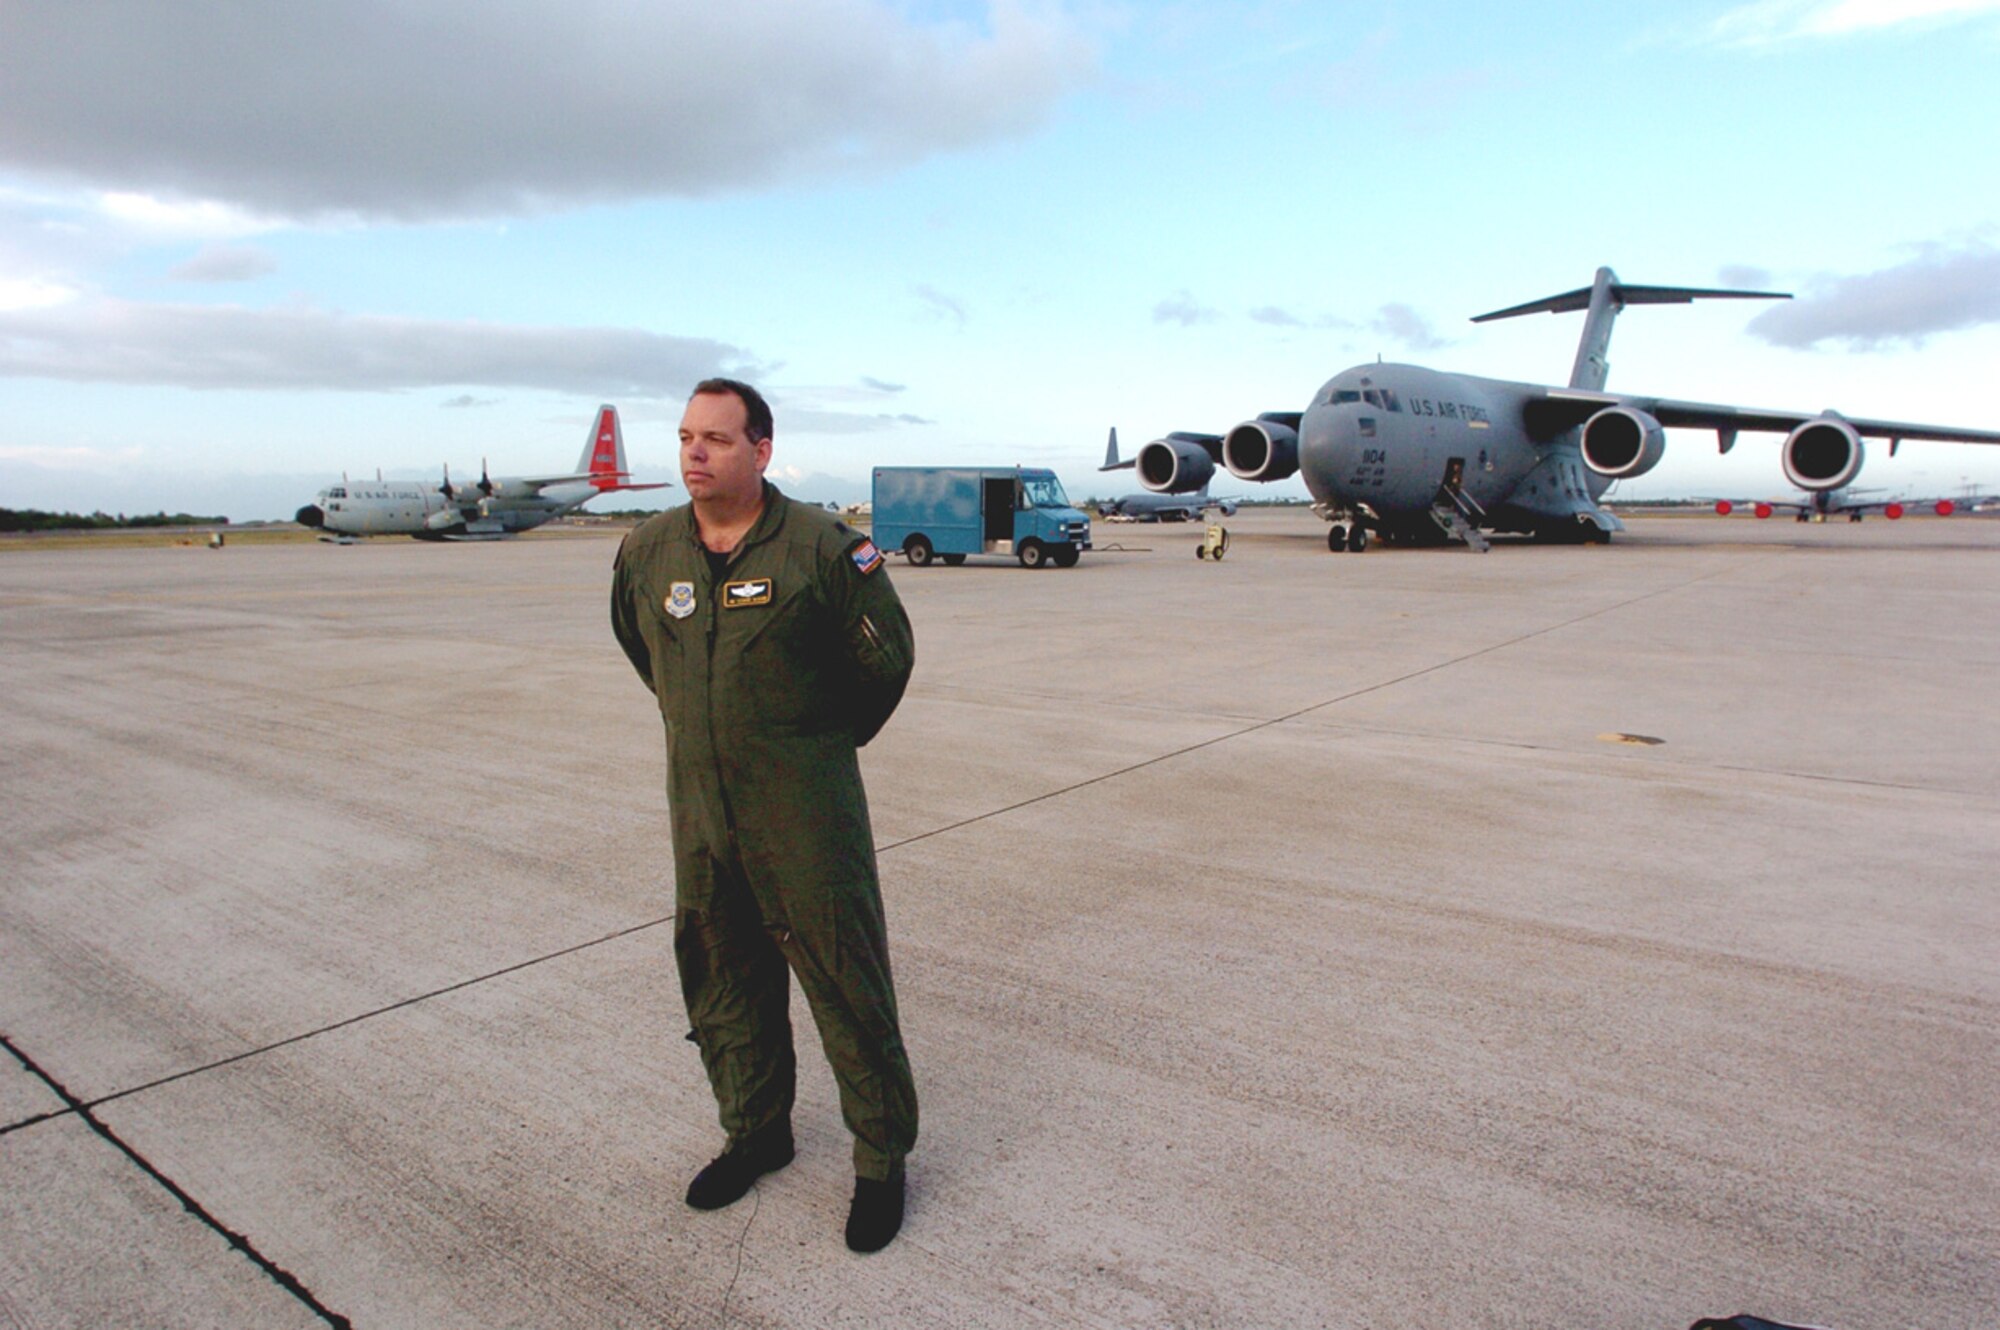 Lt. Col. Jim McGann stands on the Hickam flightline in front of a C-17 Globemaster III from McChord Air Force Base, Wash., and an LC-130 Hercules from the 109th Airlift Wing at Scotia, New York. The 2006-2007 season of the 13th Air Force-led Joint Task Force-Support Forces Antarctica, Operation Deep Freeze, wrapped up Feb. 26 with the redeployment of the aircraft from Christchurch, New Zealand. This unique joint and total force mission has supported the National Science Foundation and U.S. Antarctic Program since 1955. (U.S. Air Force photo) 
